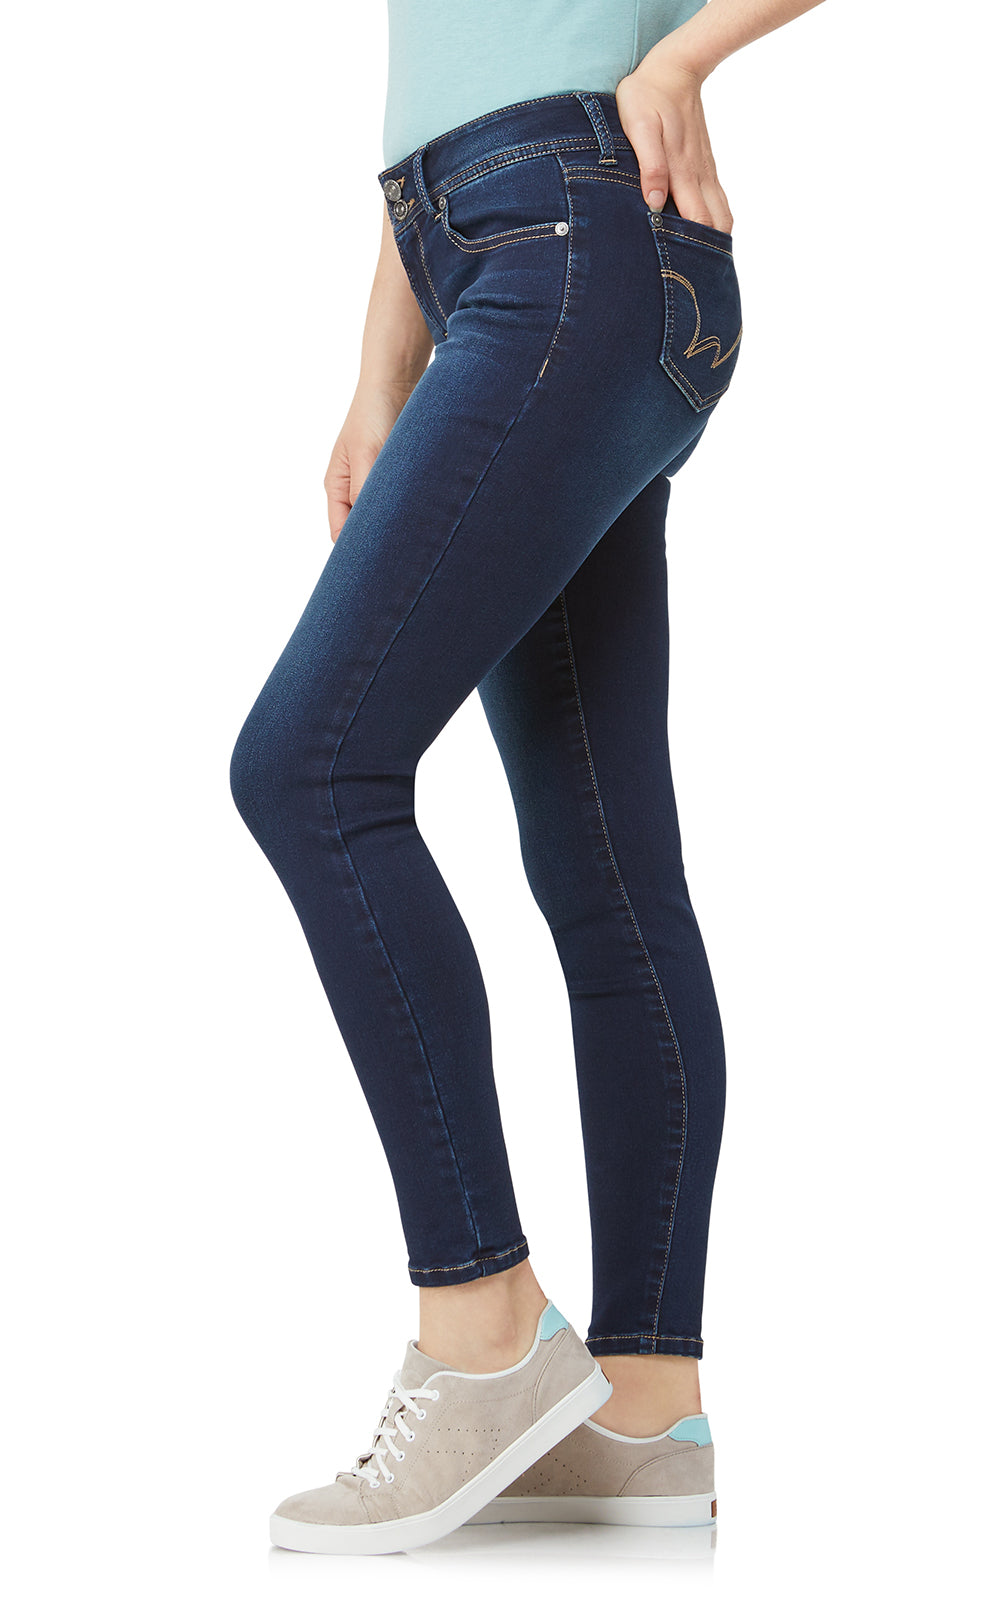 InstaSmooth Seamless Collection – WallFlower Jeans